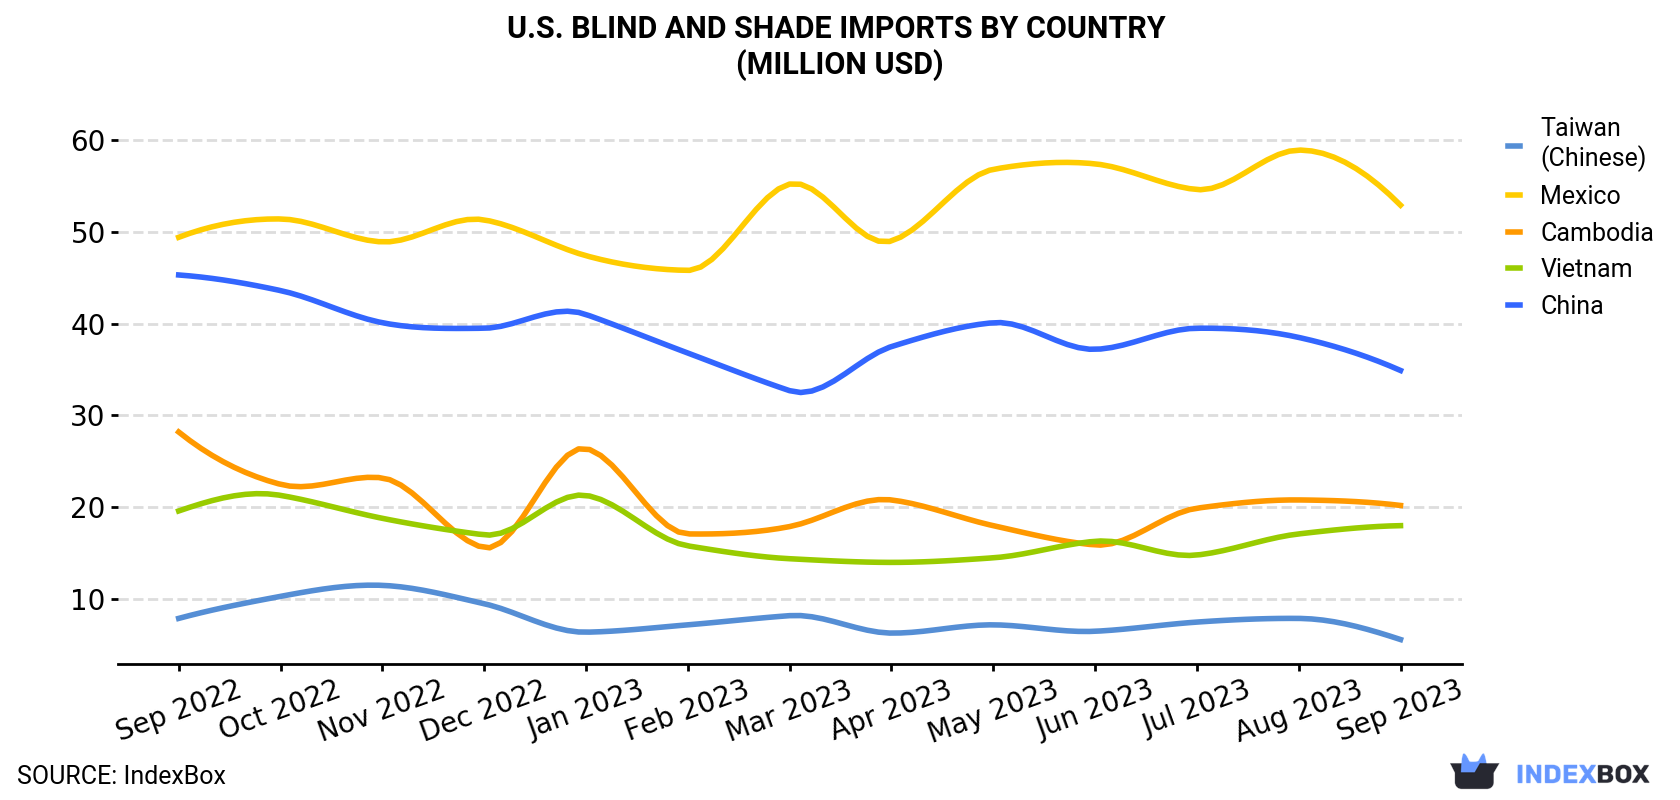 U.S. Blind And Shade Imports By Country (Million USD)